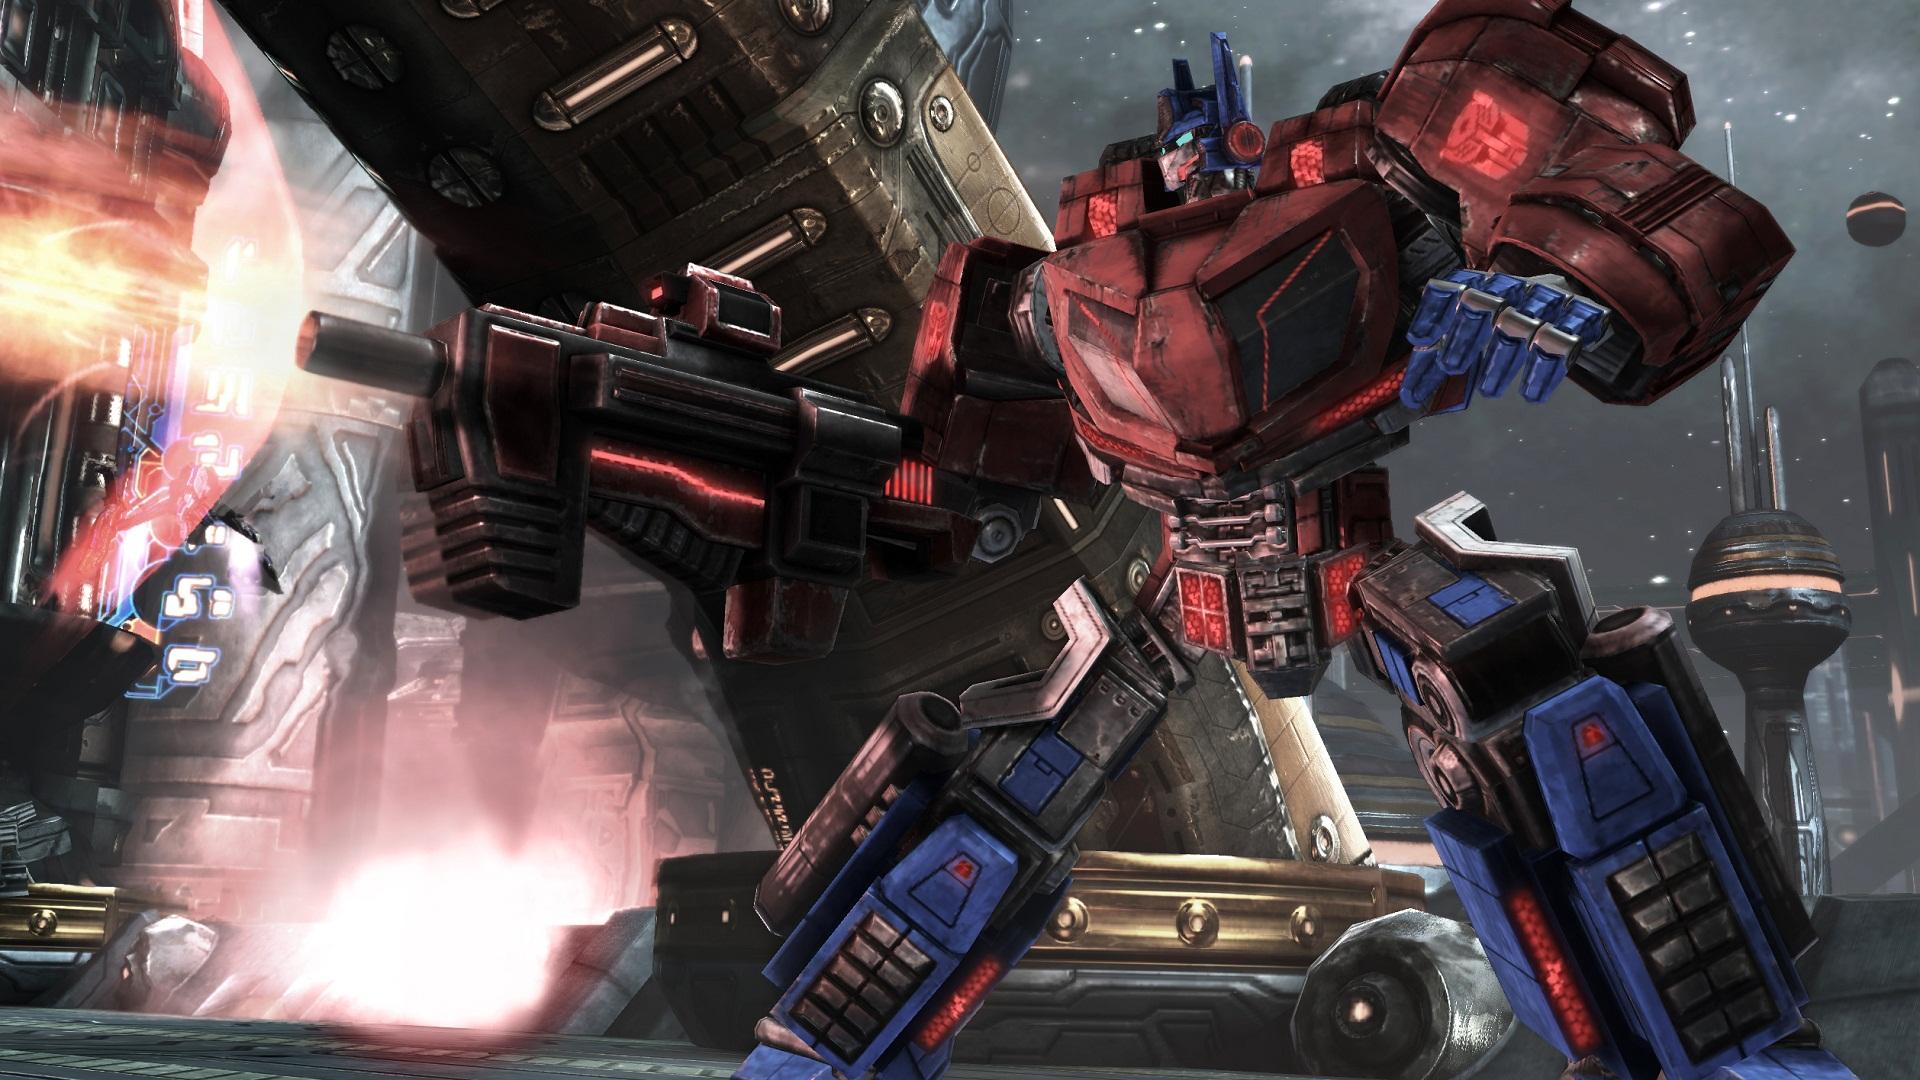 transformers war for cybertron free download pc game full version